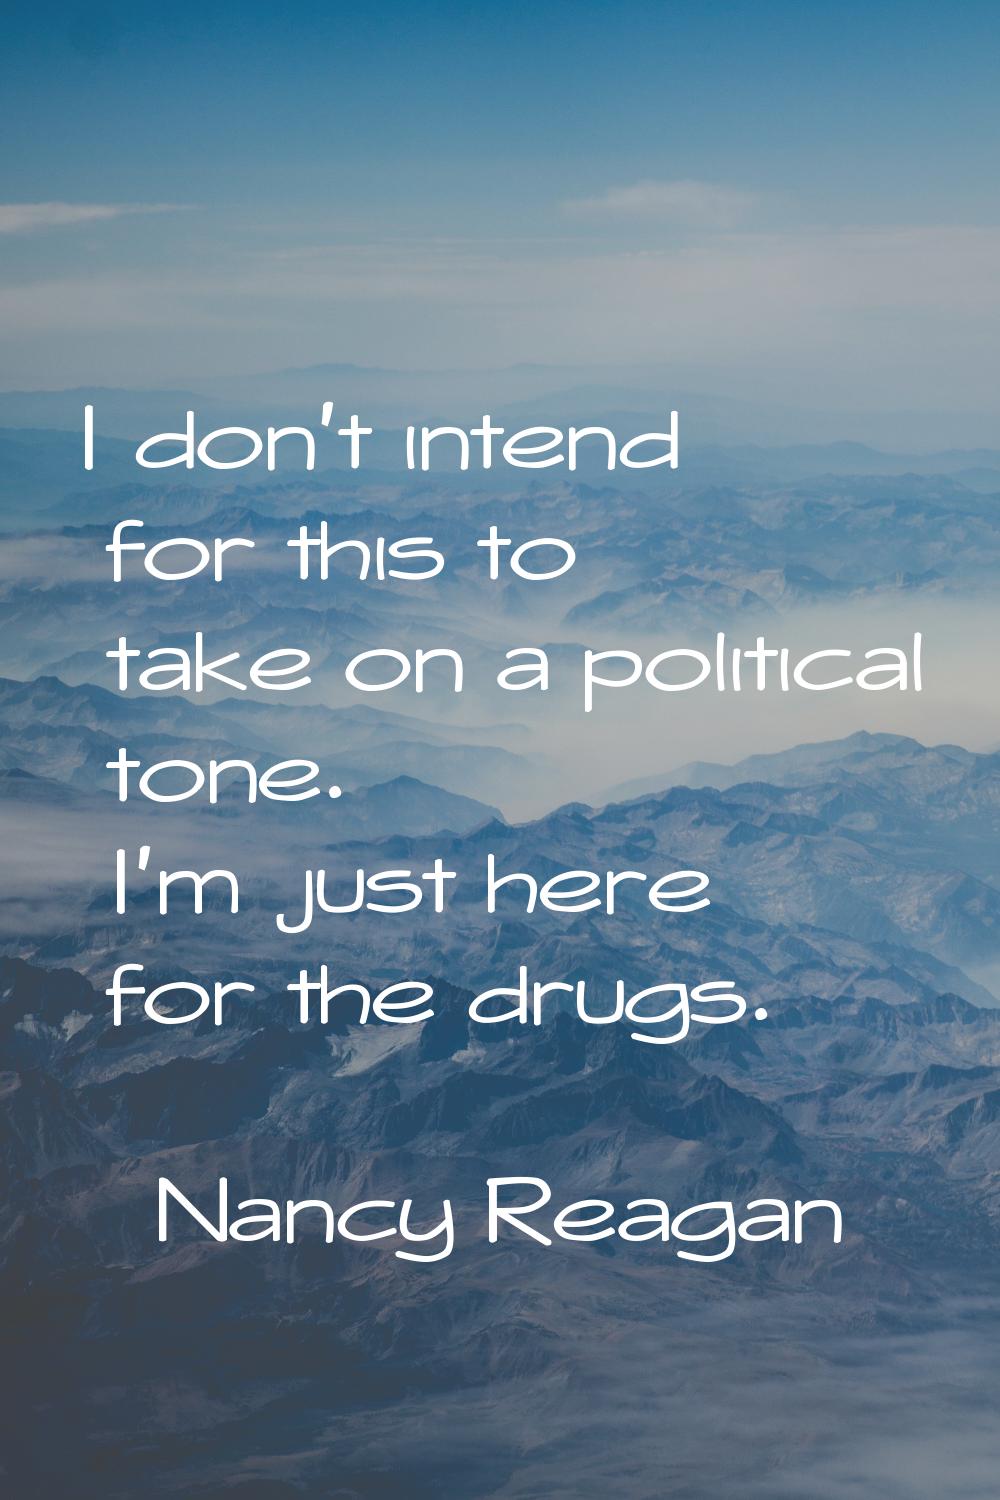 I don't intend for this to take on a political tone. I'm just here for the drugs.